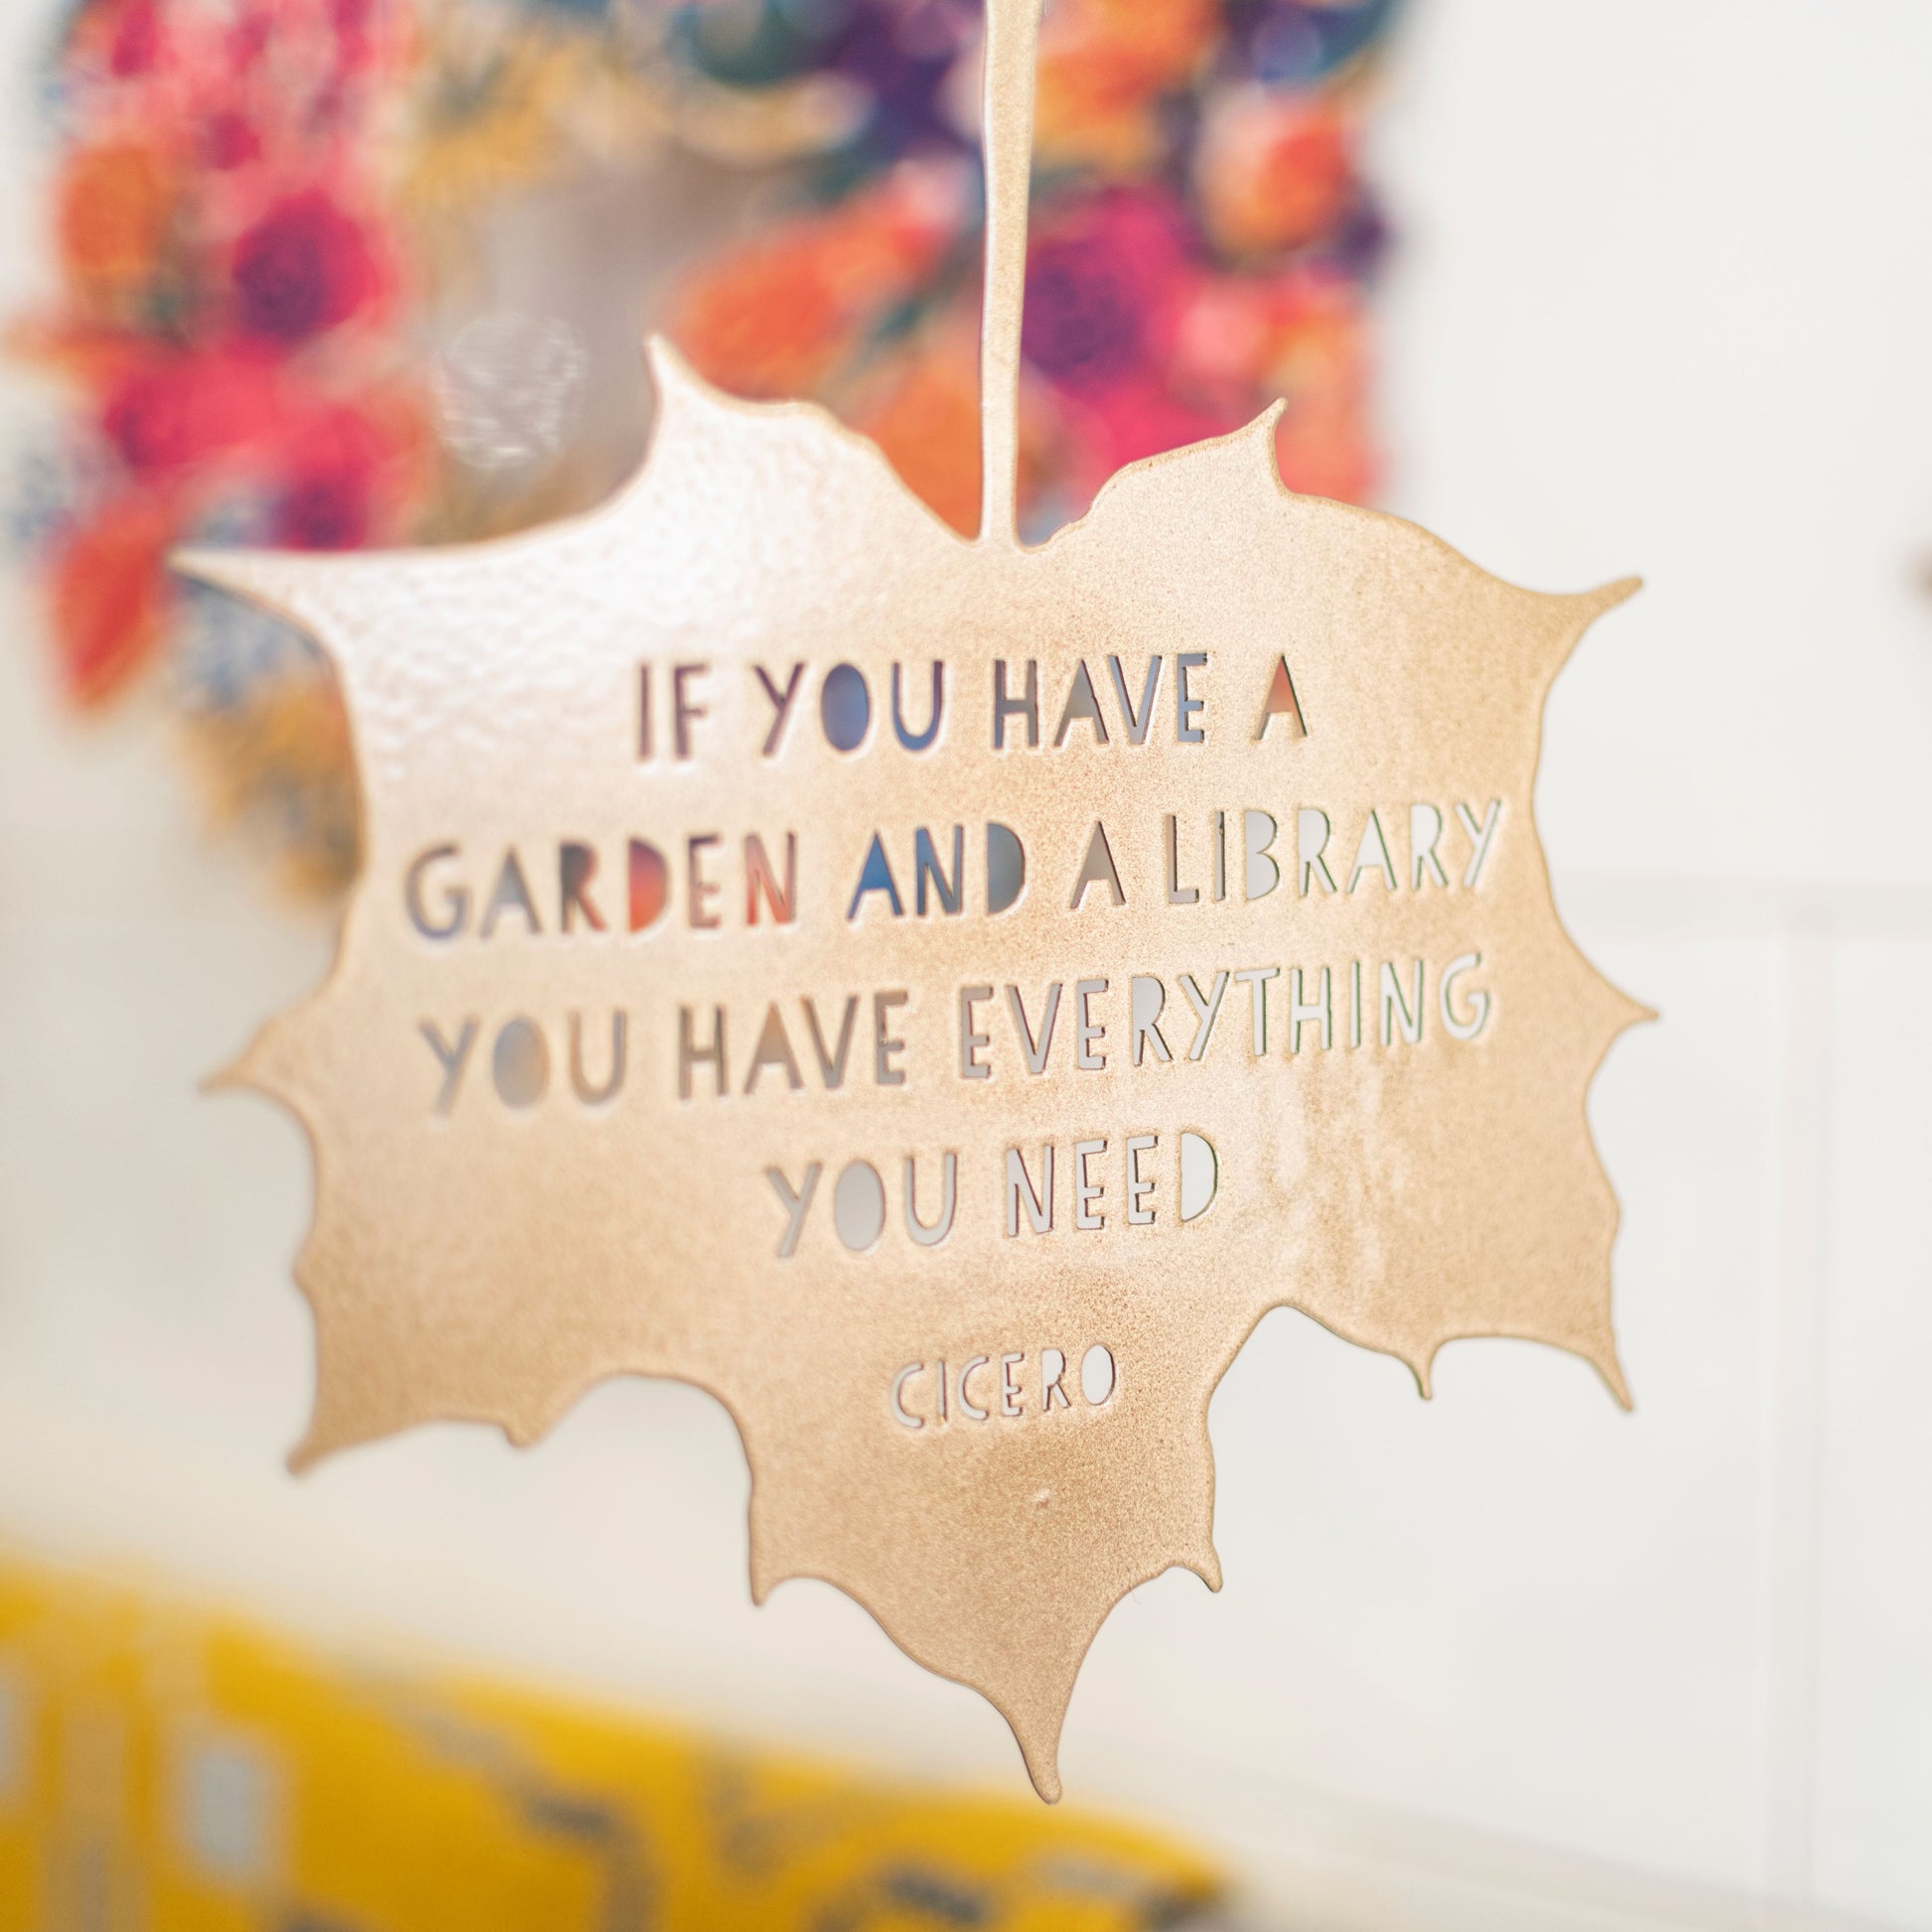 Leaf Quote - If you have a garden and a library you have everything you need - Marcus Tullius Cicero - THE BRISTOL ARTISAN